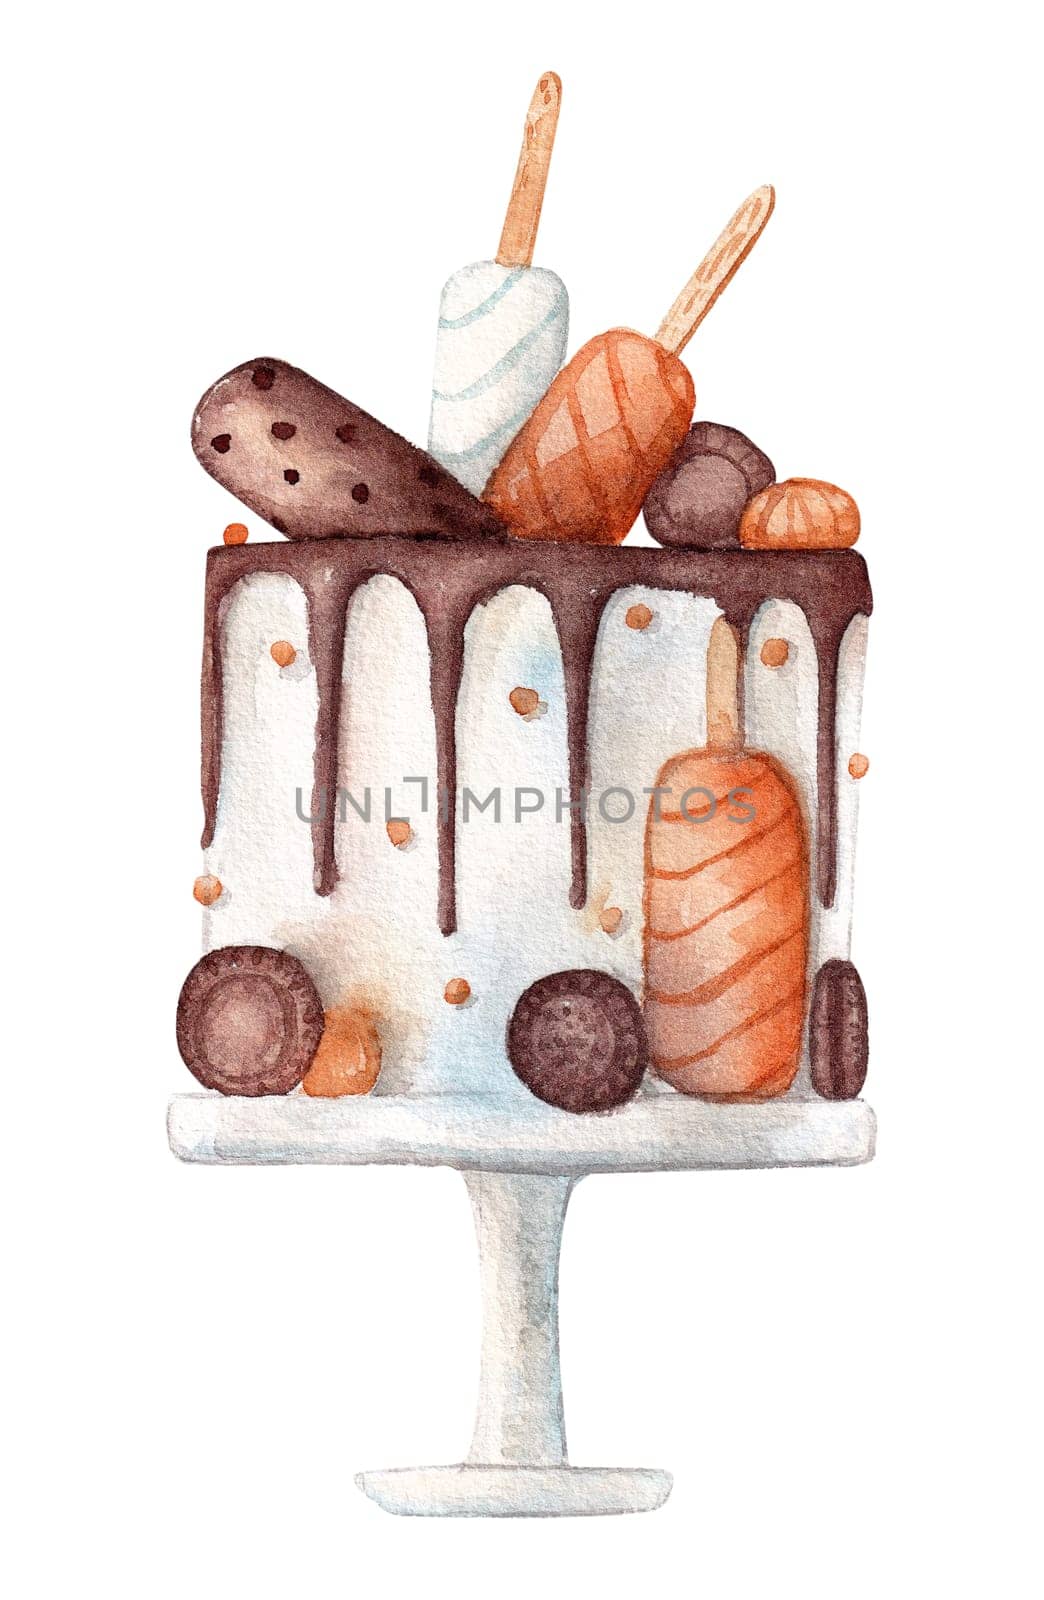 Tasty cake with cake pops on white background, watercolor illustration by Desperada